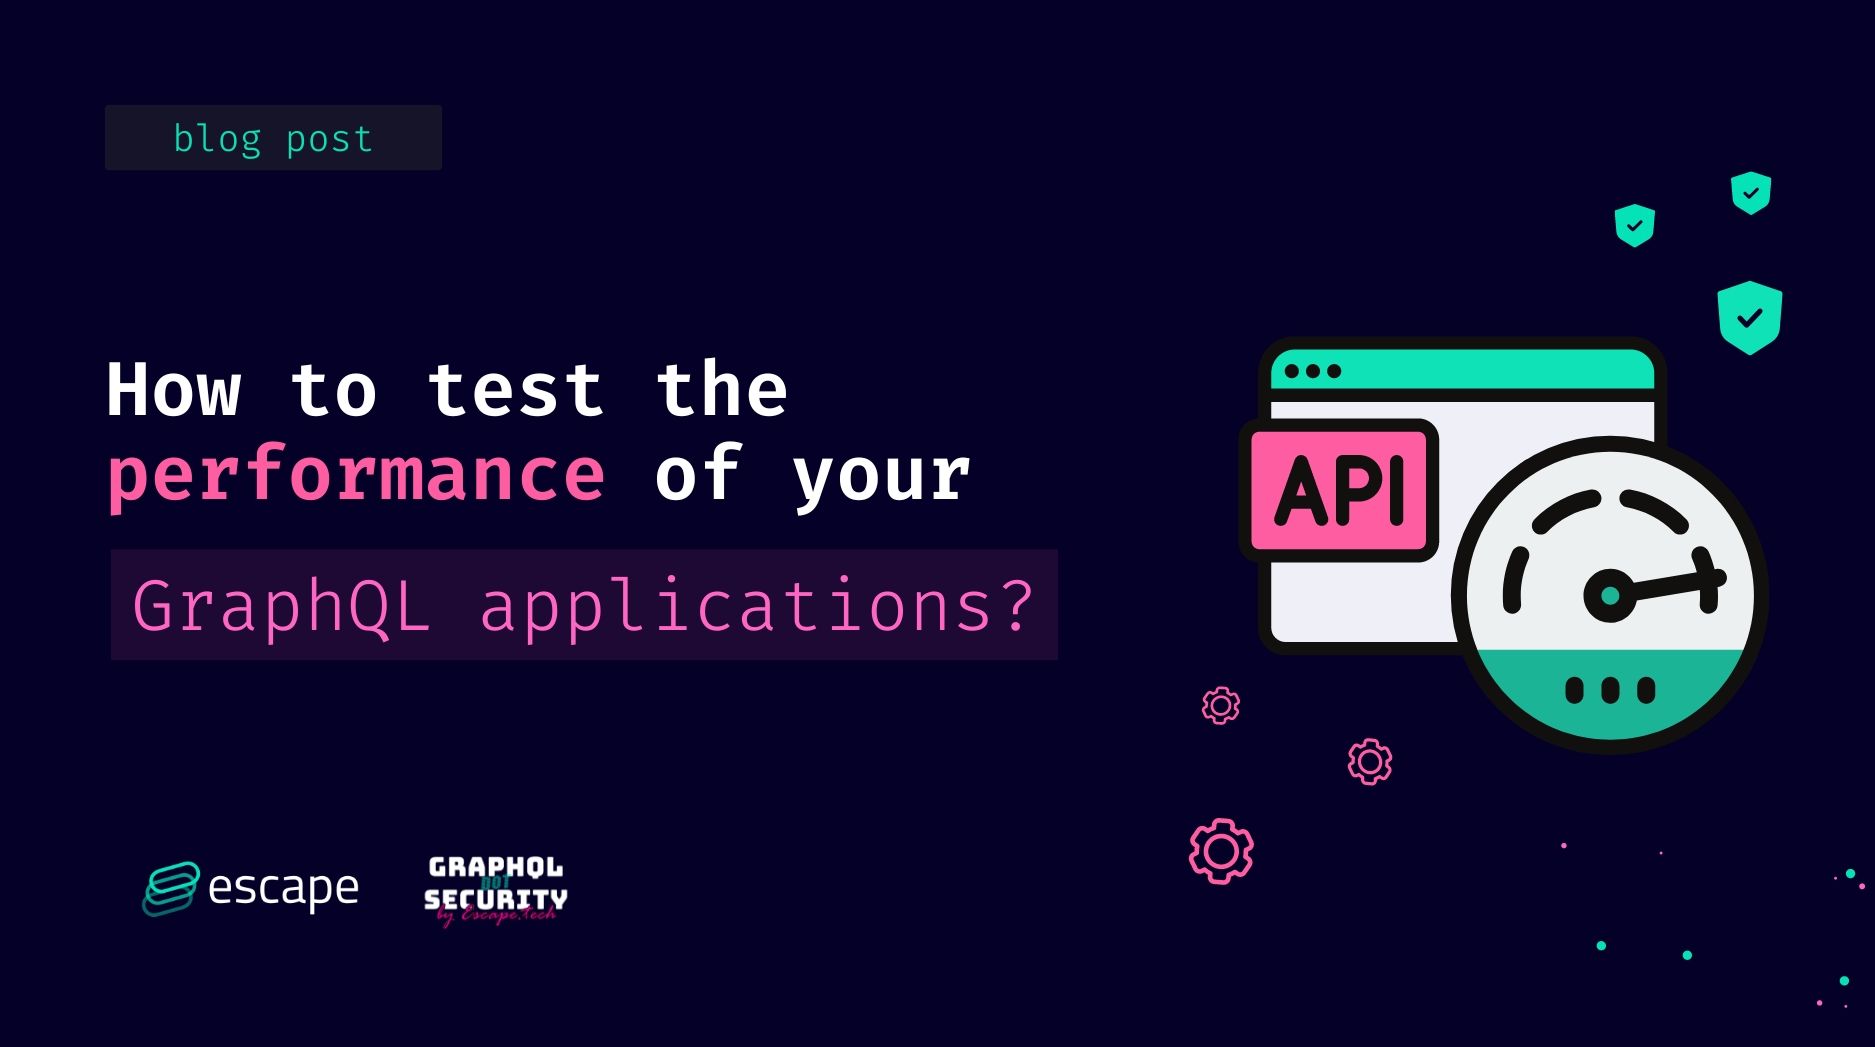 How to test the performance of your GraphQL applications?